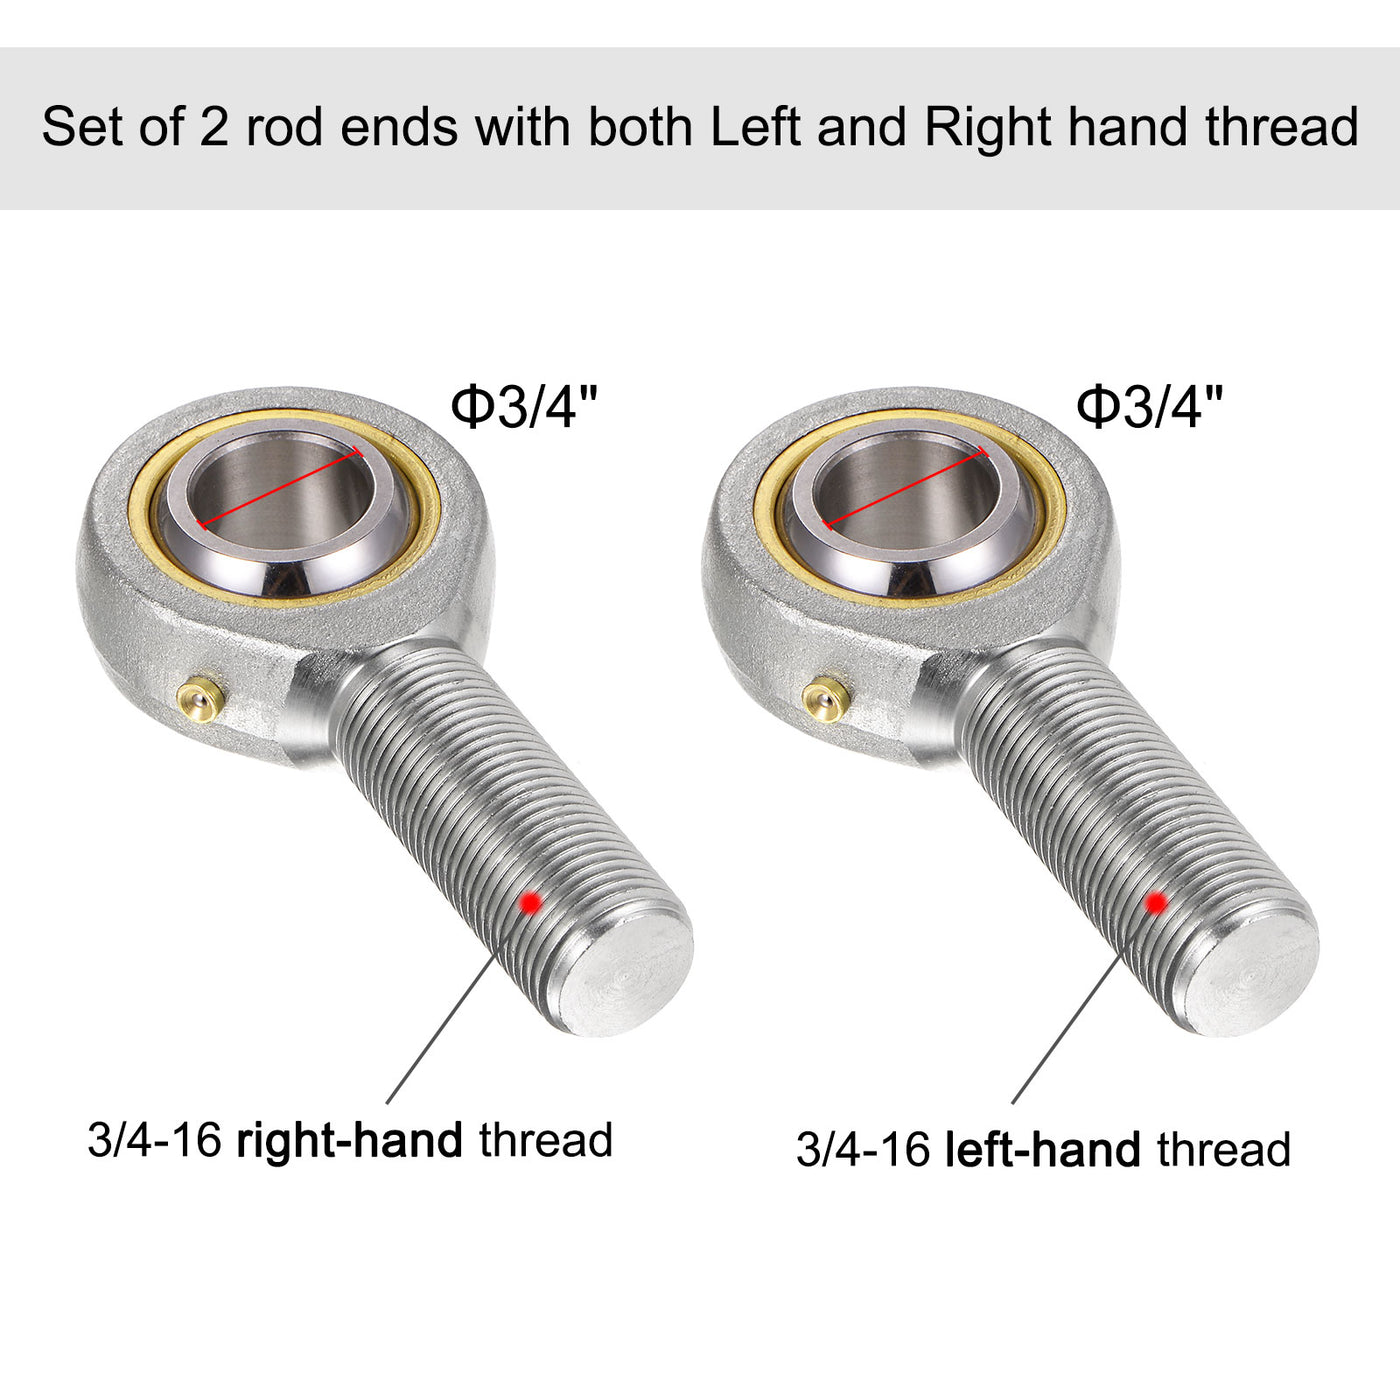 uxcell Uxcell POSB12 3/4" Male Rod End Set - 2pcs of 3/4-16 Left and Right Thread with Jam Nut